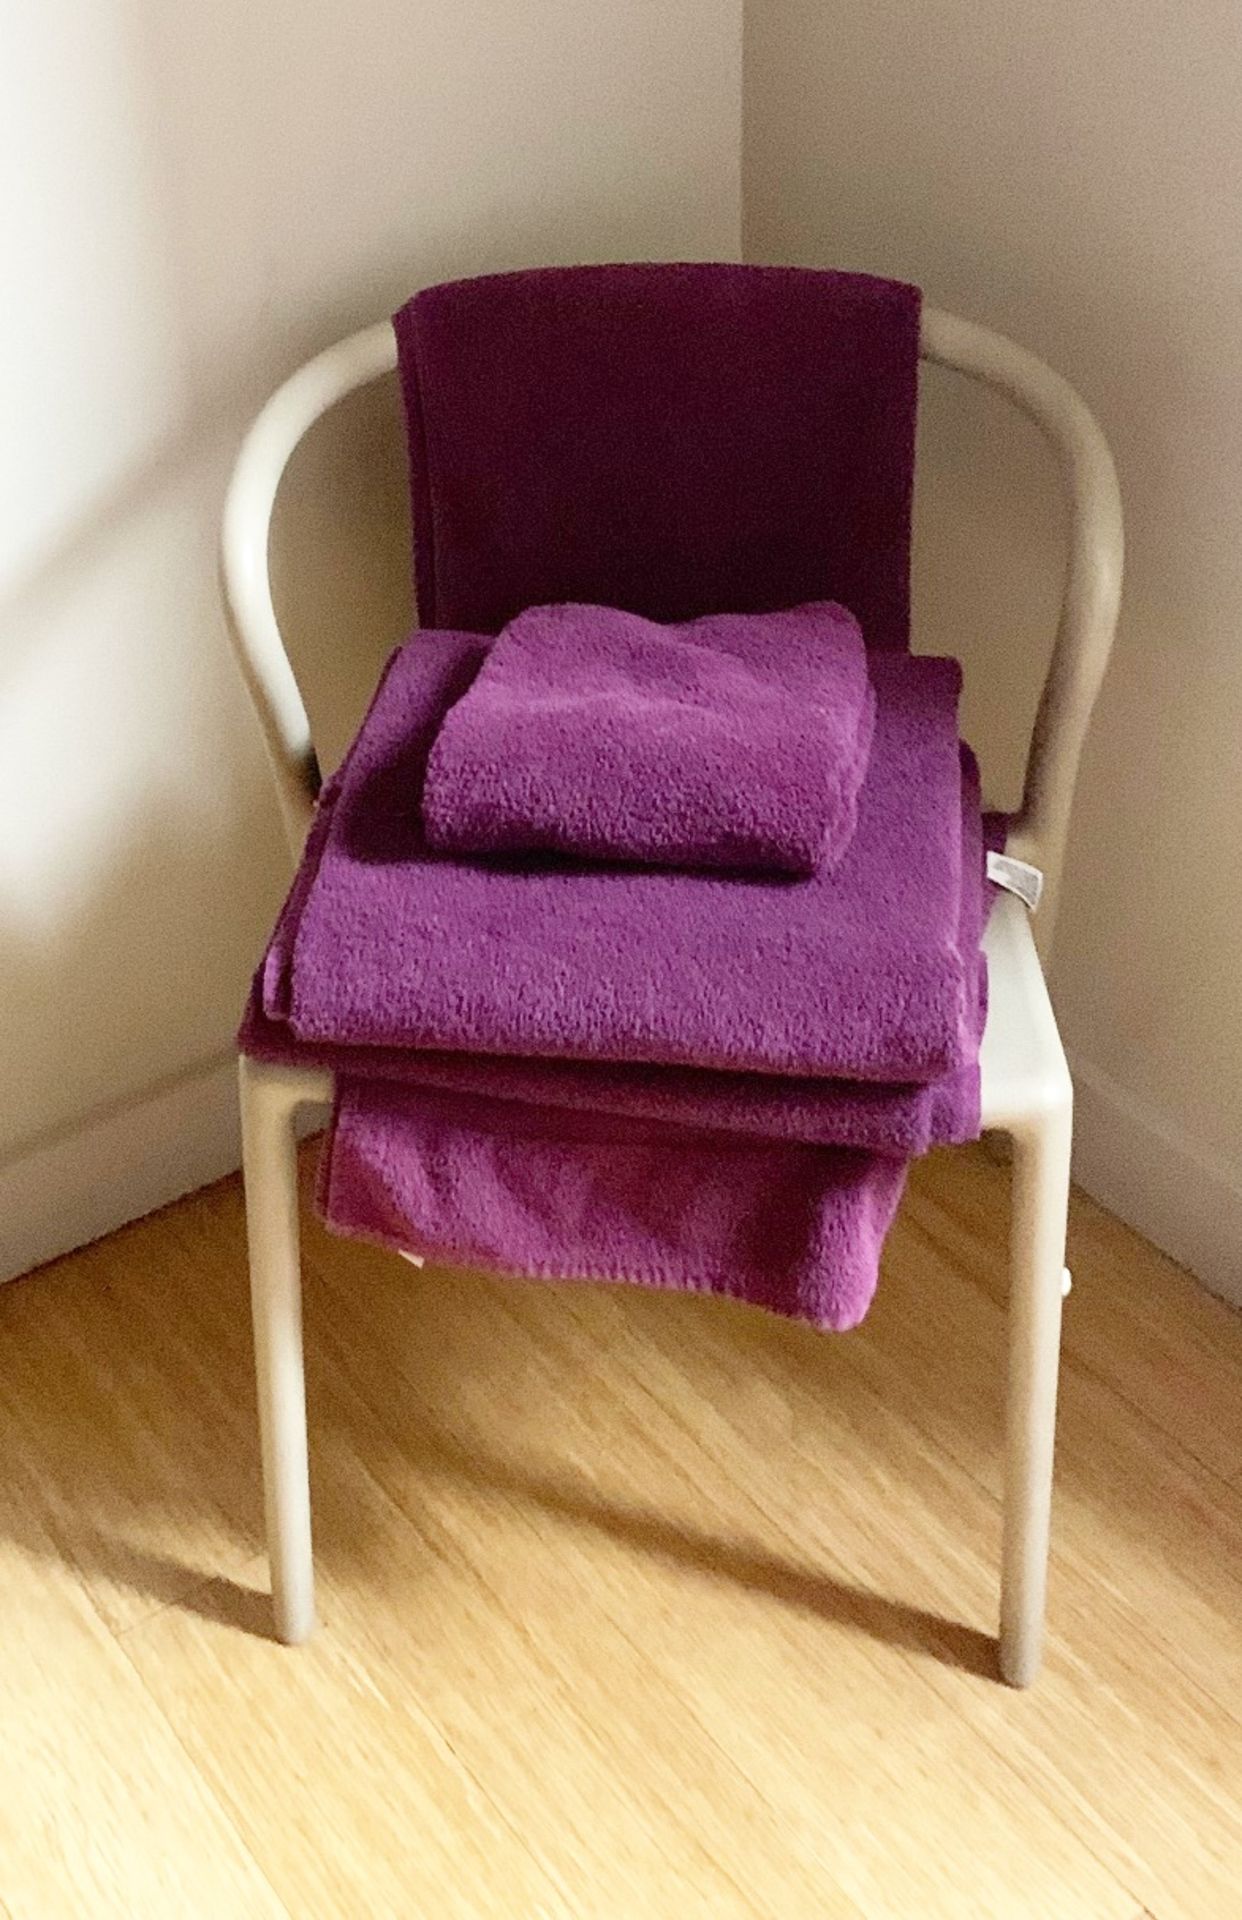 20 x Majestic Luxury 620gsm Bath Towels in Purple - Size MEDIUM - RRP £190 - CL587 - Location: - Image 4 of 4